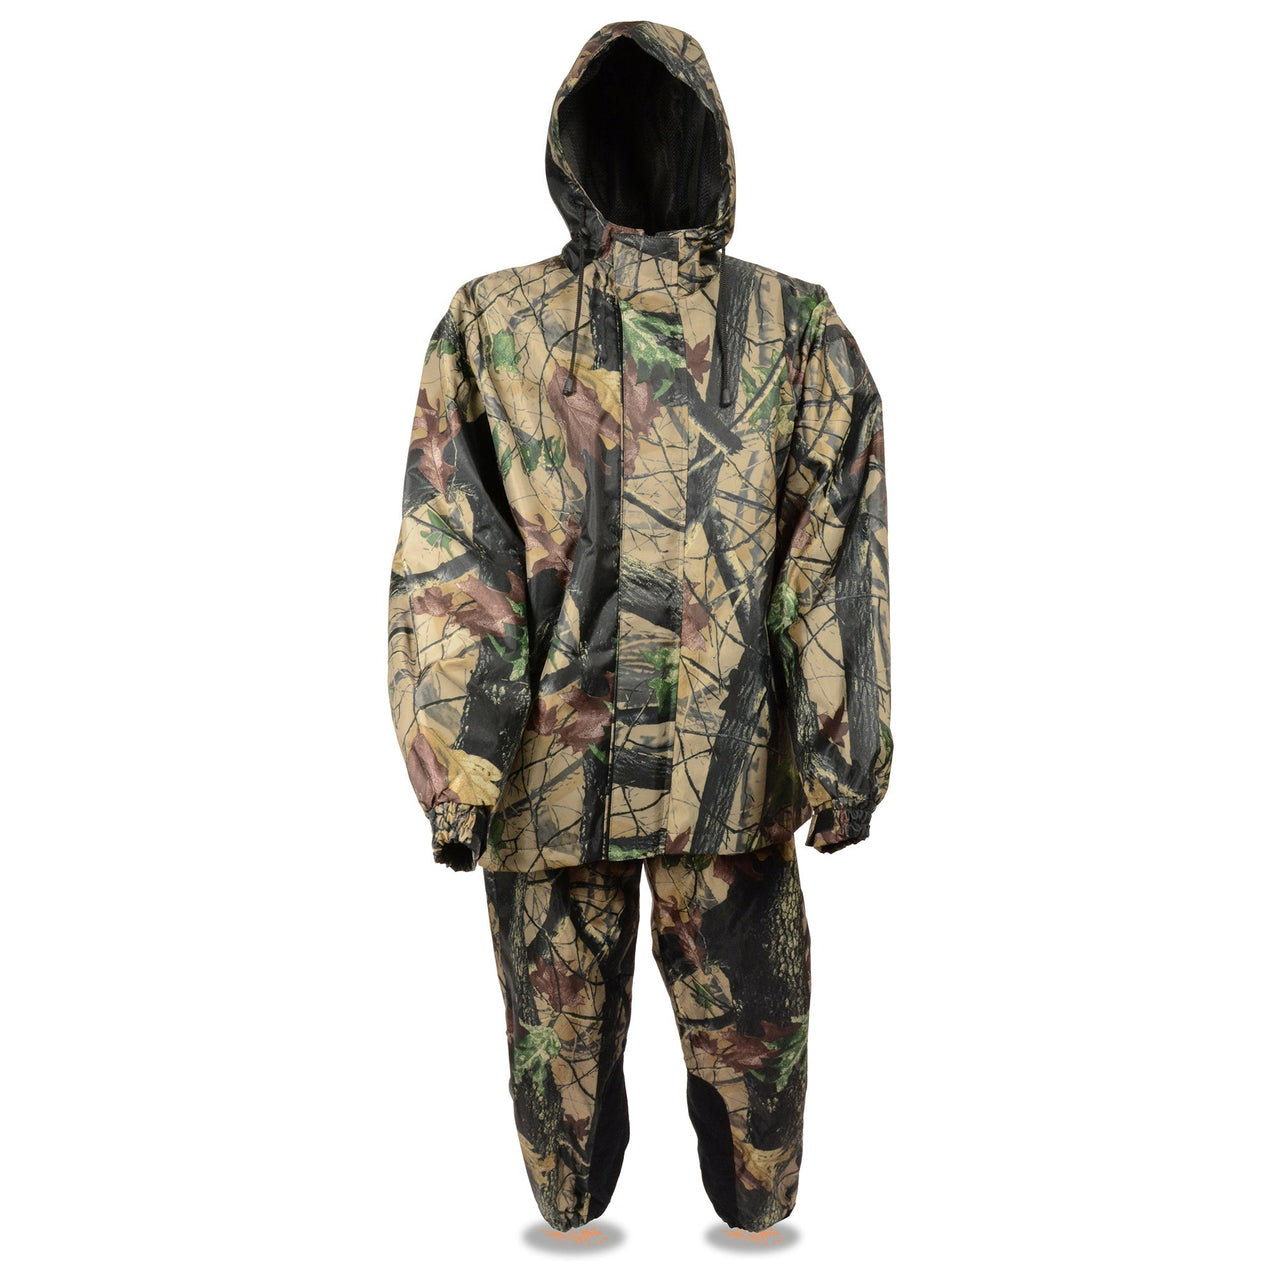 Men's Jungle Camouflage Rain Suit High Performance Features - HighwayLeather